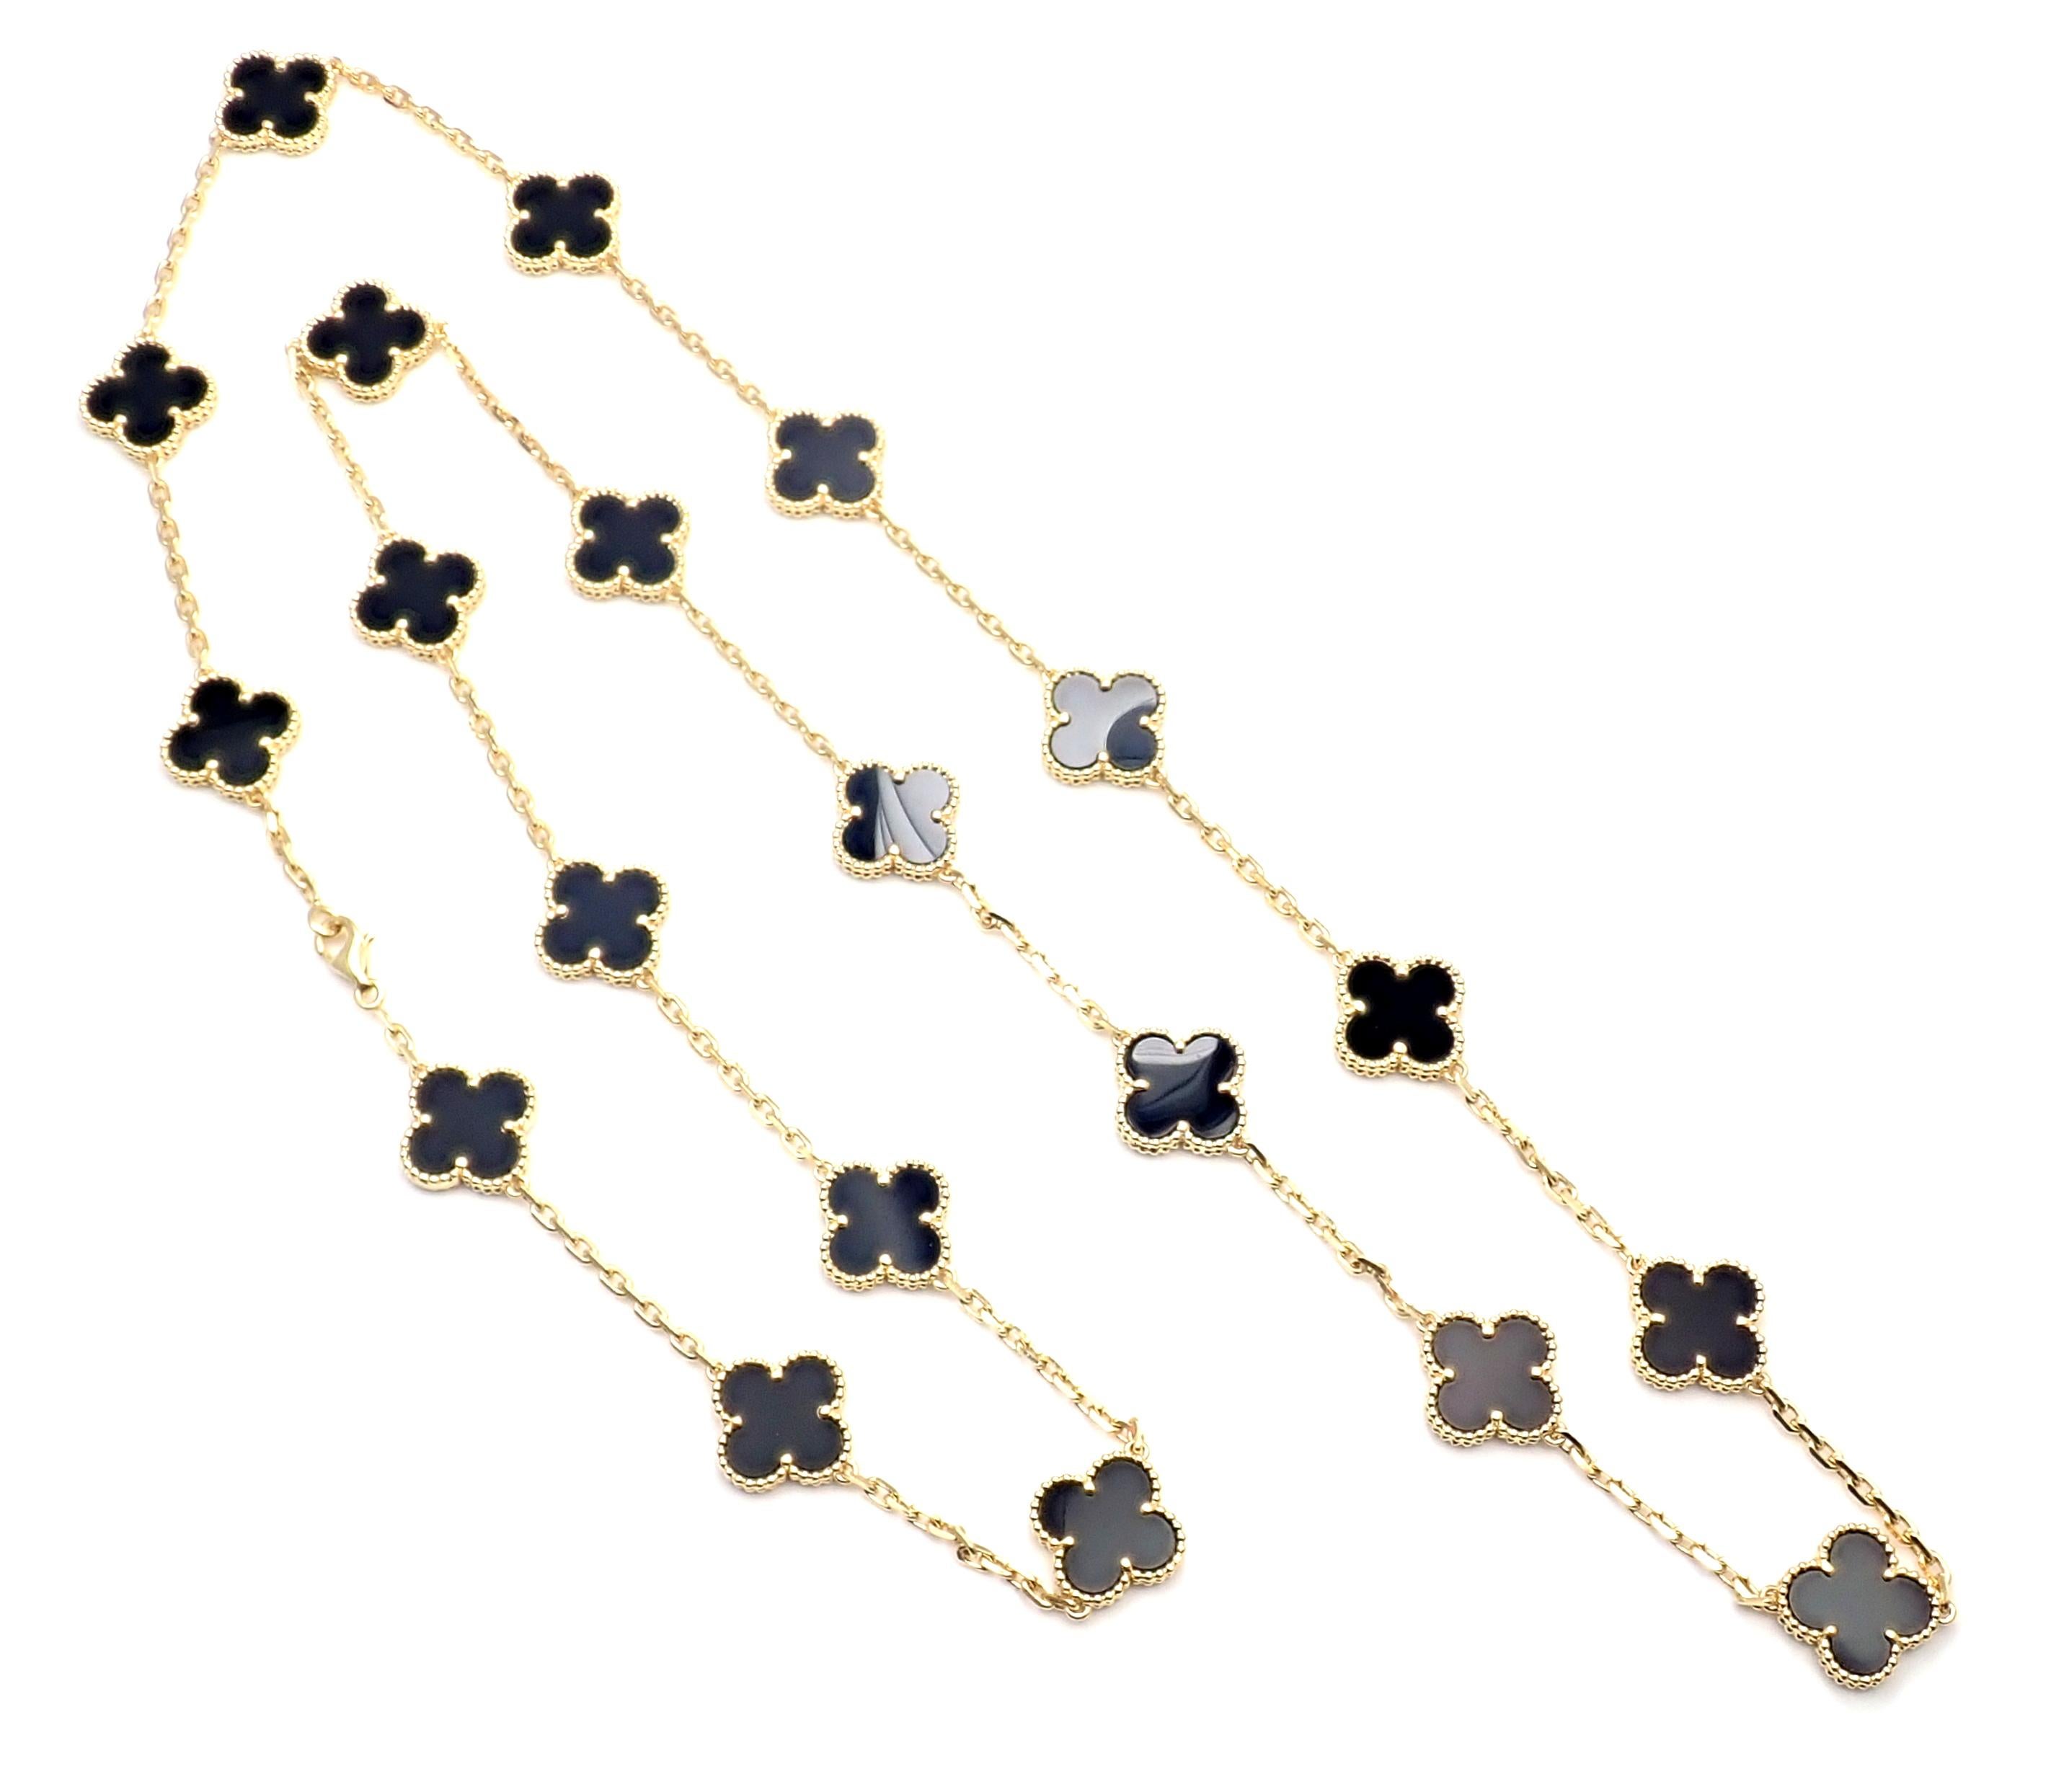 18k Yellow Gold Alhambra Twenty-Motif Black Onyx Necklace by  Van Cleef & Arpels,
with 20 motifs of black onyx Alhambra stones, 15mm each.  
Details: 
Length: 34